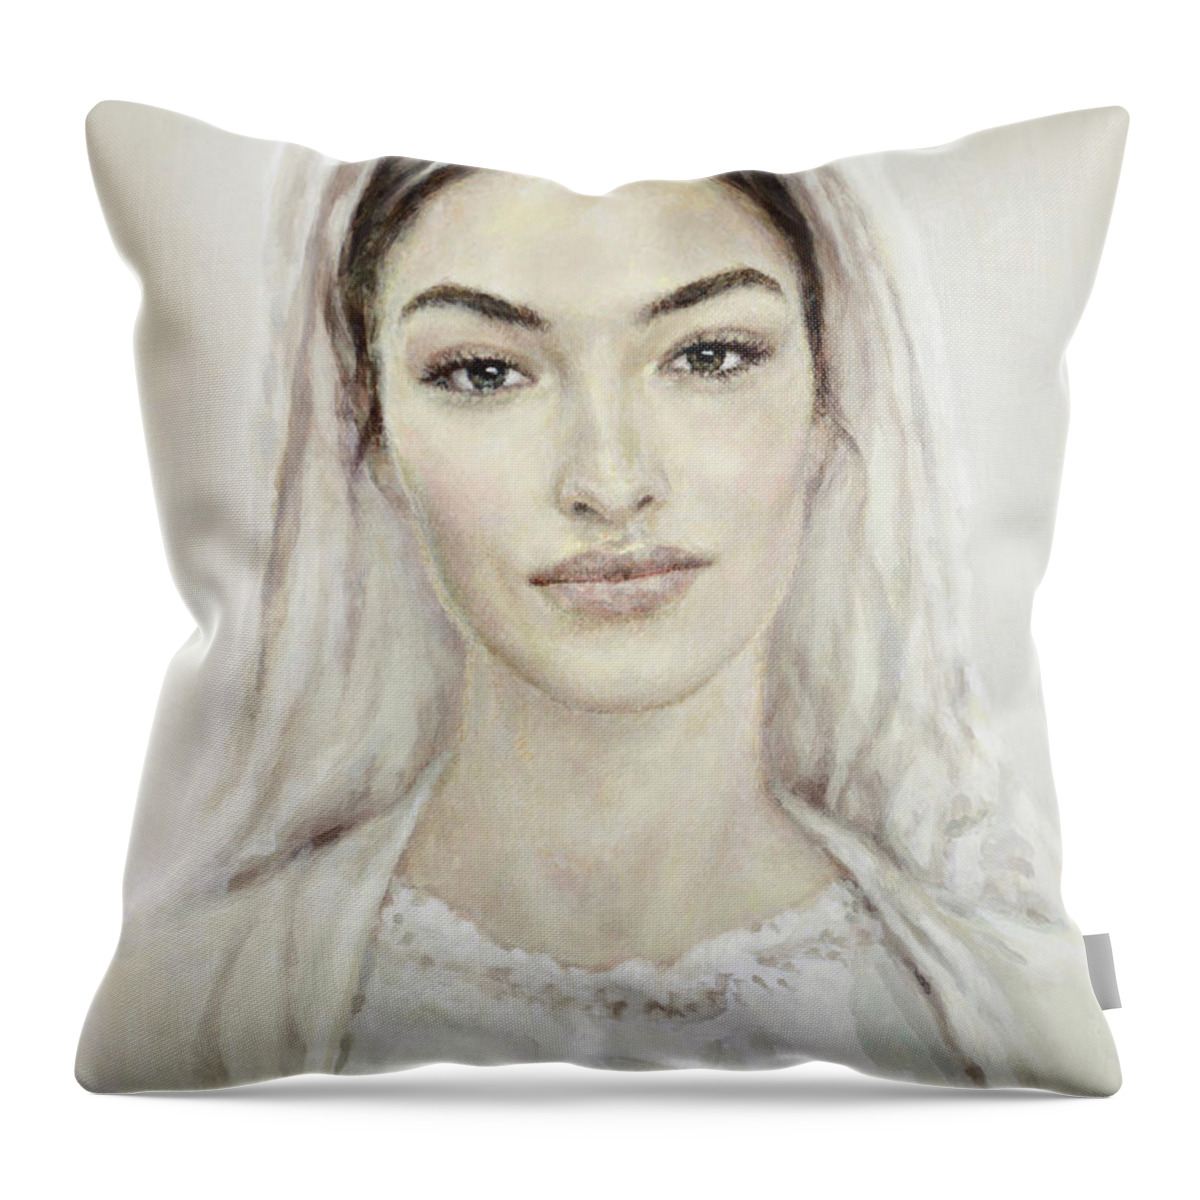 Our Throw Pillow featuring the painting The Blessed Virgin by Cameron Smith